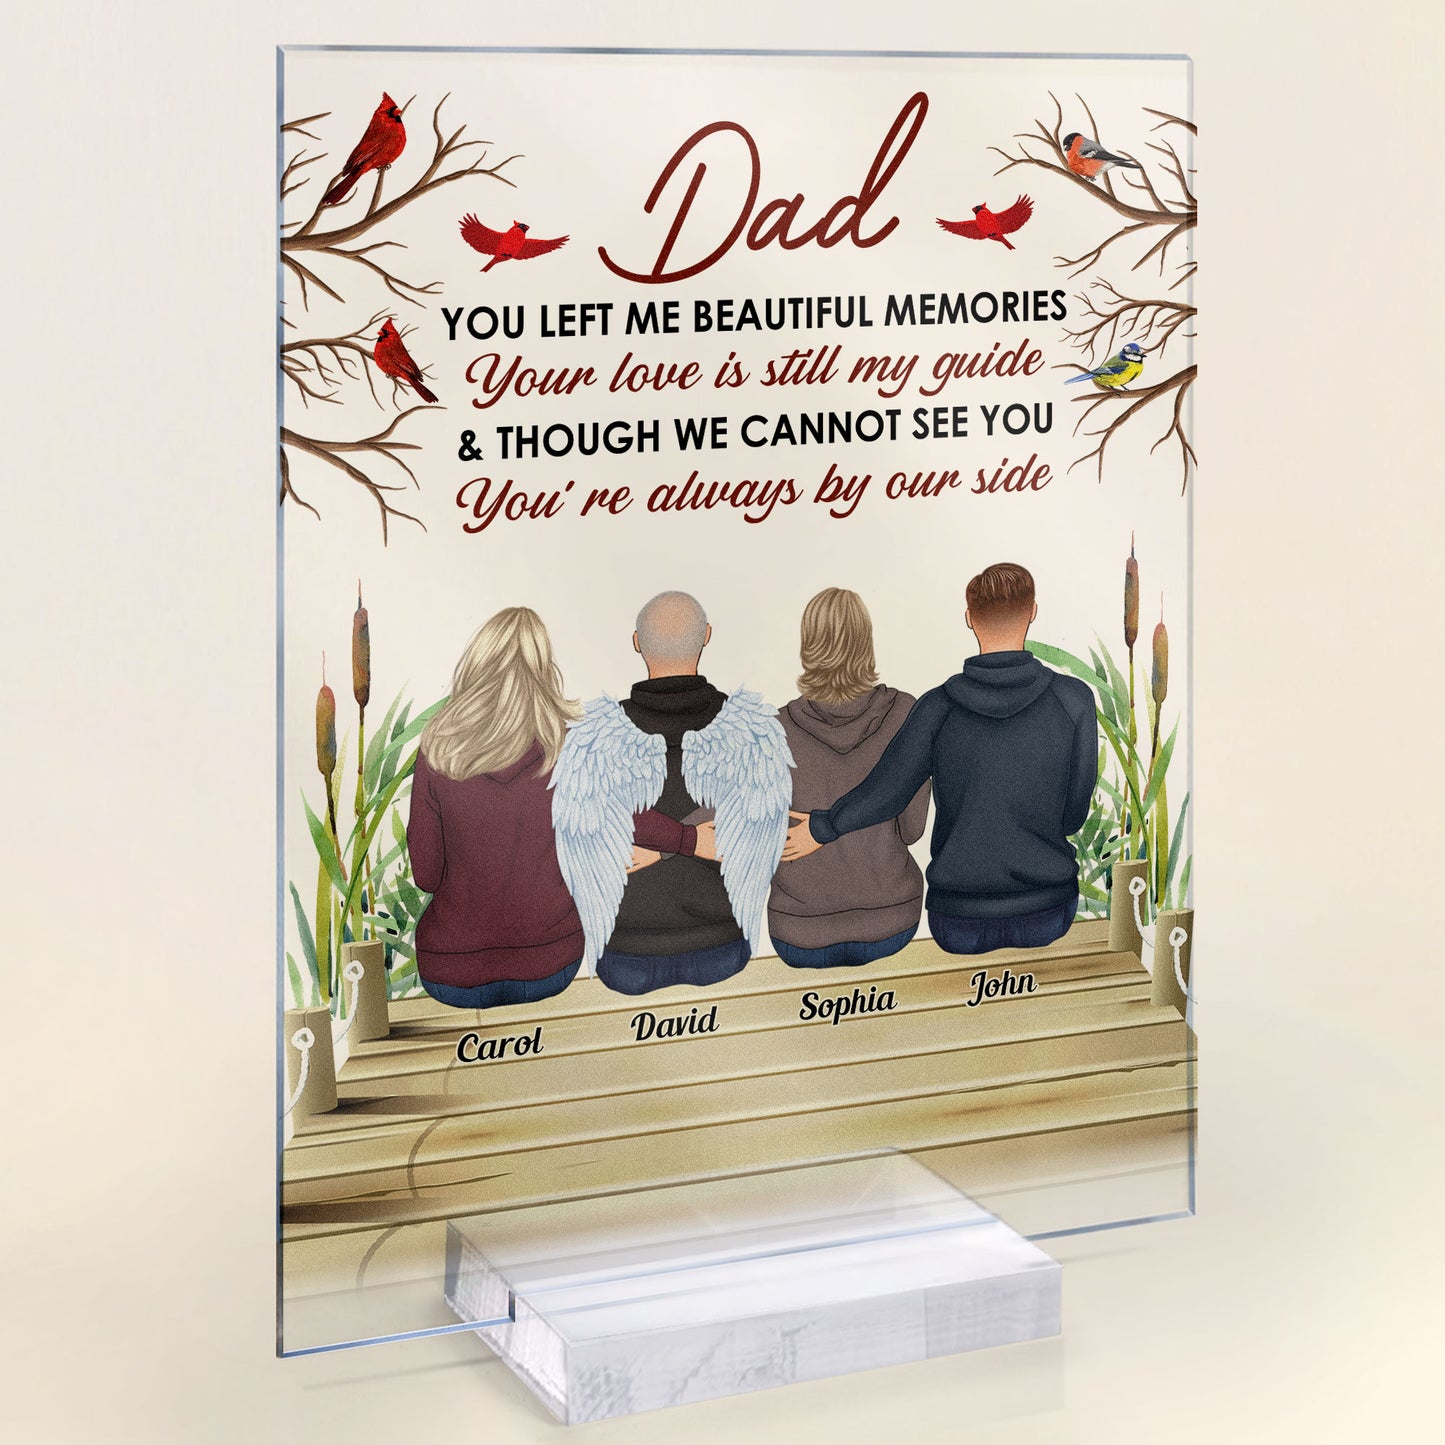 Your Love Is Still Our Guide - Personalized Acrylic Plaque - Memorial, Father's Day Gift For Family Members